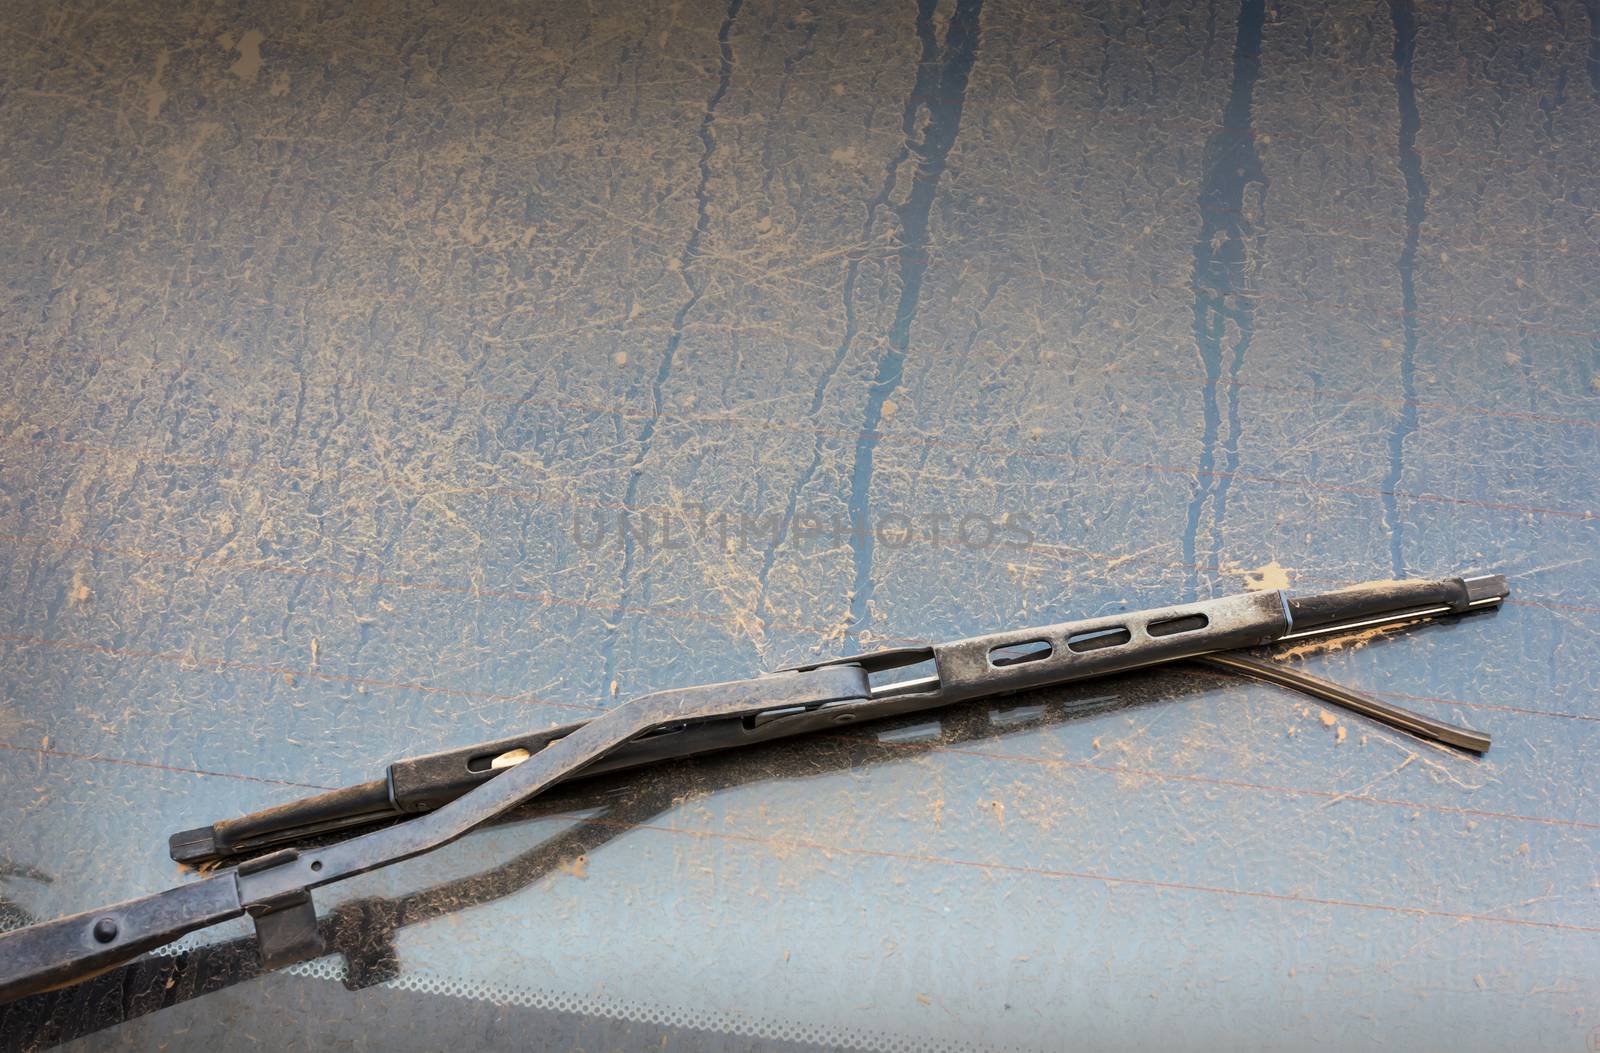 Old windshield wiper and mirror covered by dust, dirty car